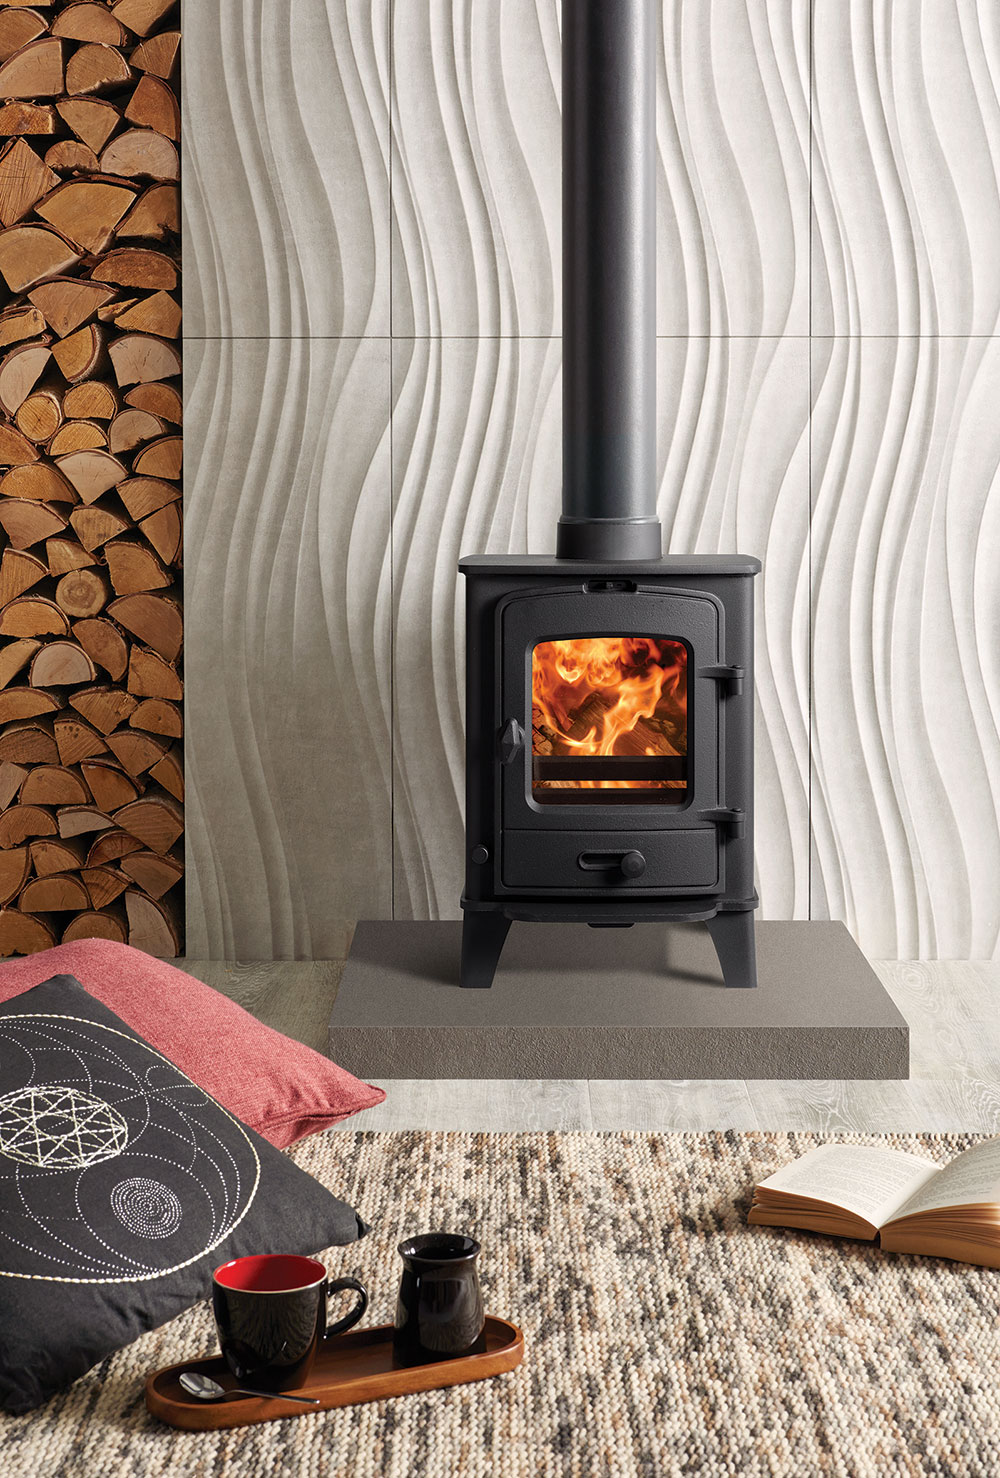 Stockton 3 Multi Fuel Wood Burning Stove Glass 216mm x 205mm Free UK Delivery 